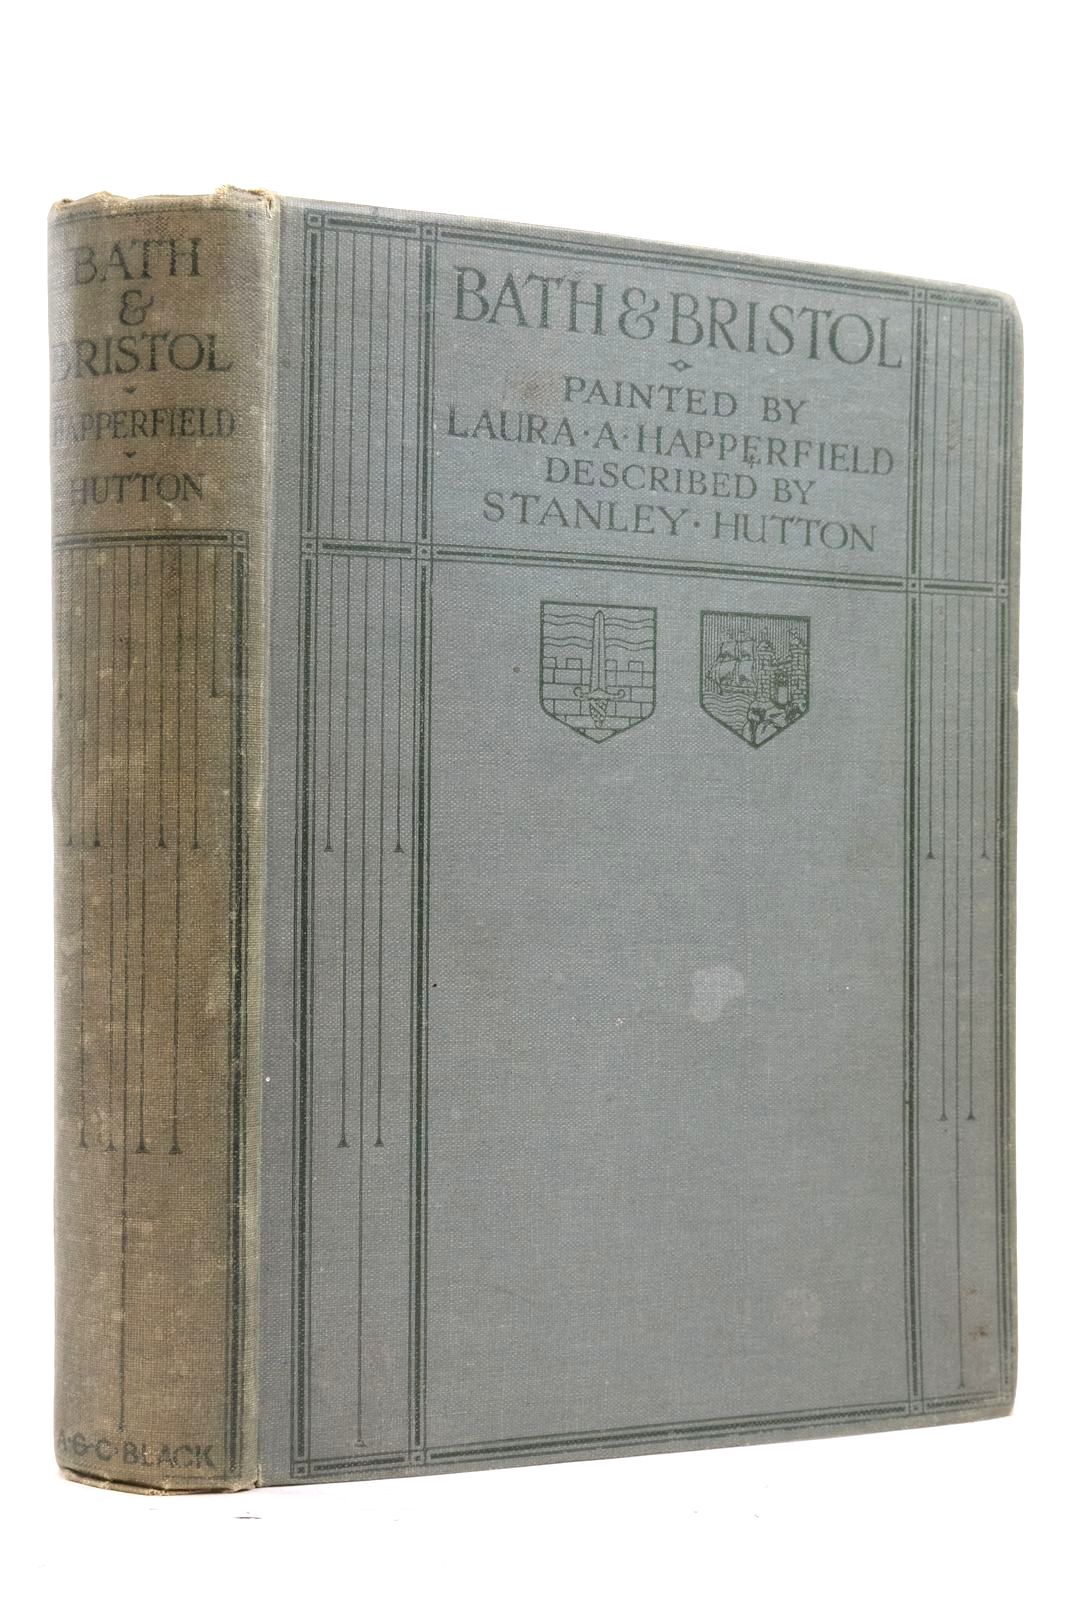 Photo of BATH & BRISTOL written by Hutton, Stanley illustrated by Happerfield, Laura A. published by A. &amp; C. Black (STOCK CODE: 2137410)  for sale by Stella & Rose's Books